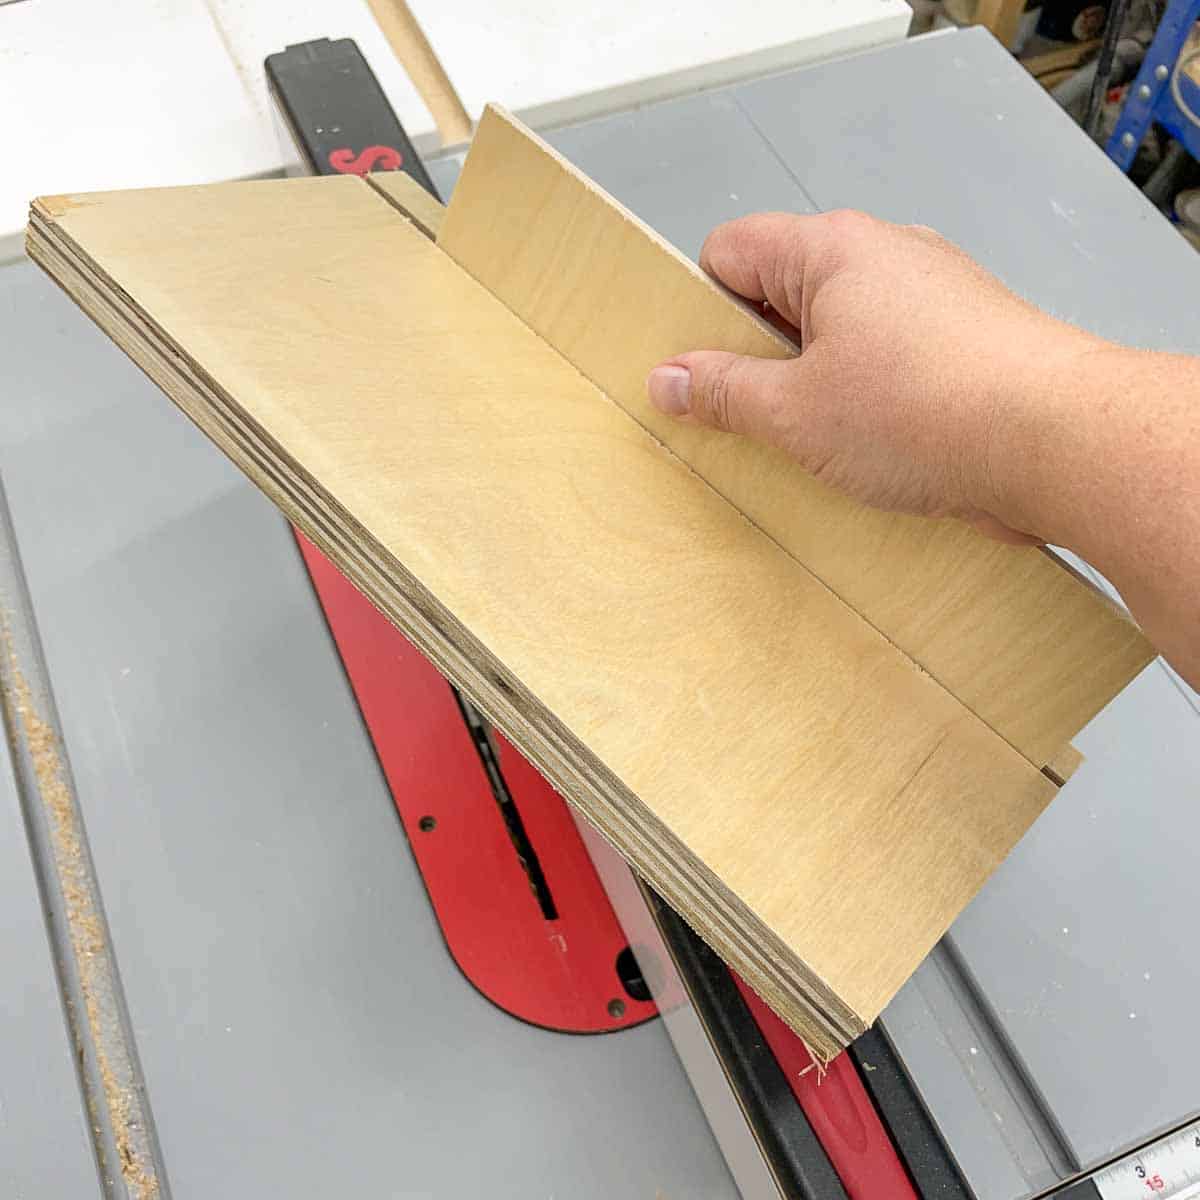 testing fit of groove for back panel of cabinet